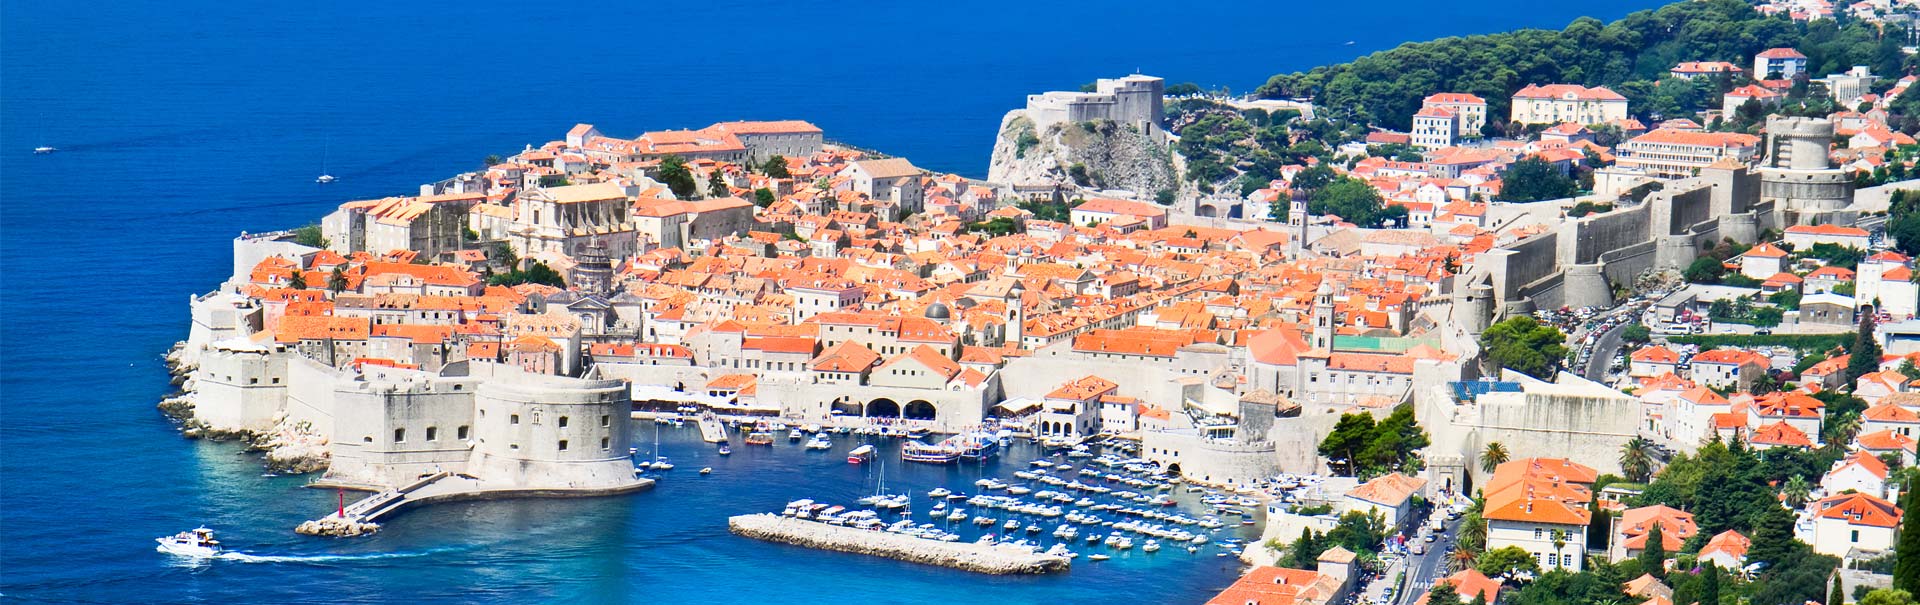 croatia holiday packages